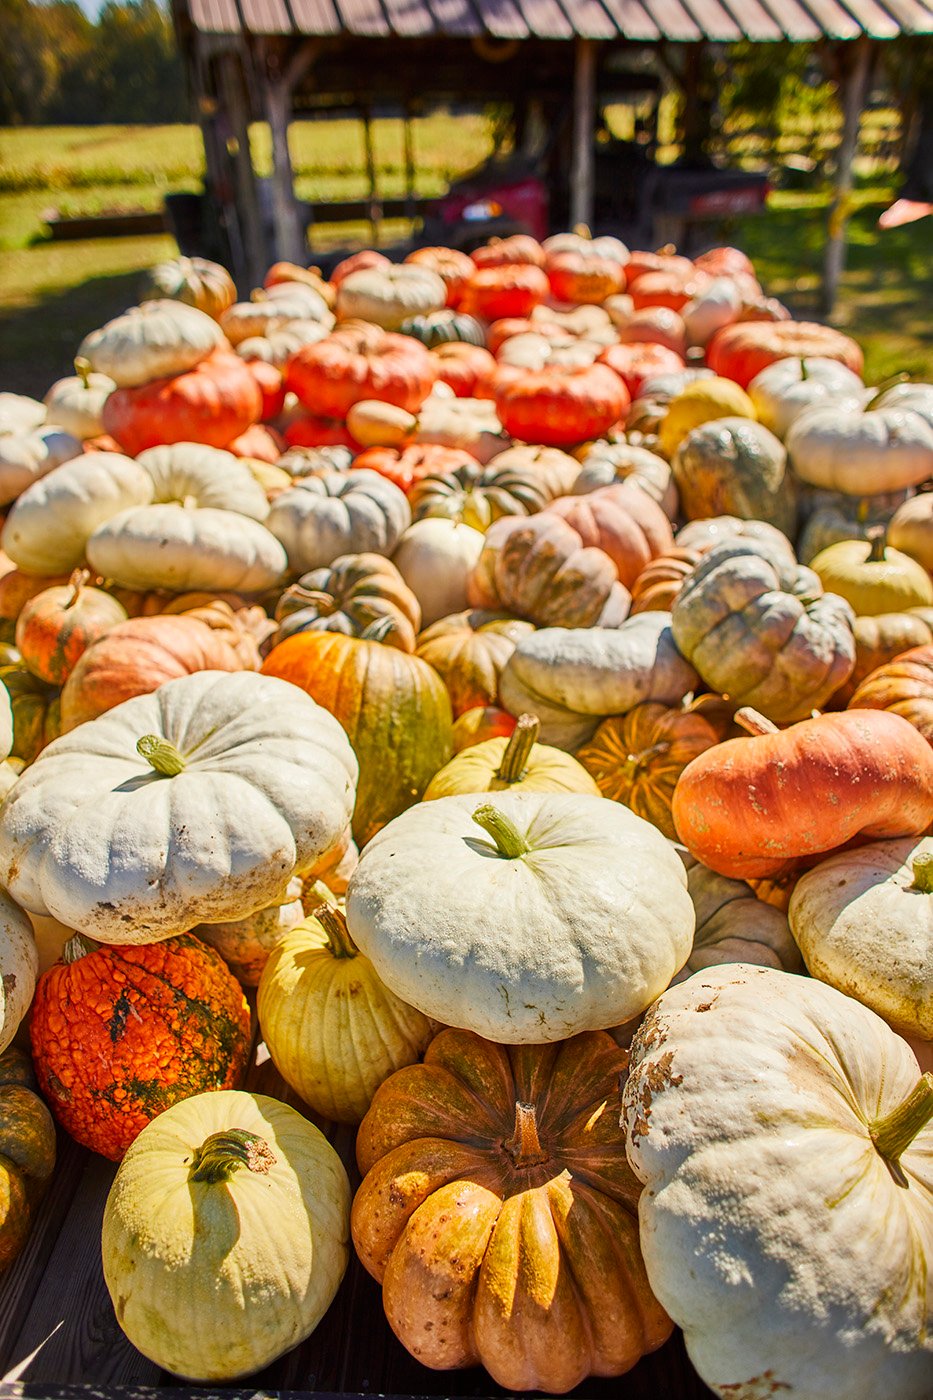 Pumpkins of all sizes at Parrish Pumpkin patch in Lunenburg county, Virginia shot by Tyler Darden for Virginia Living magazine.